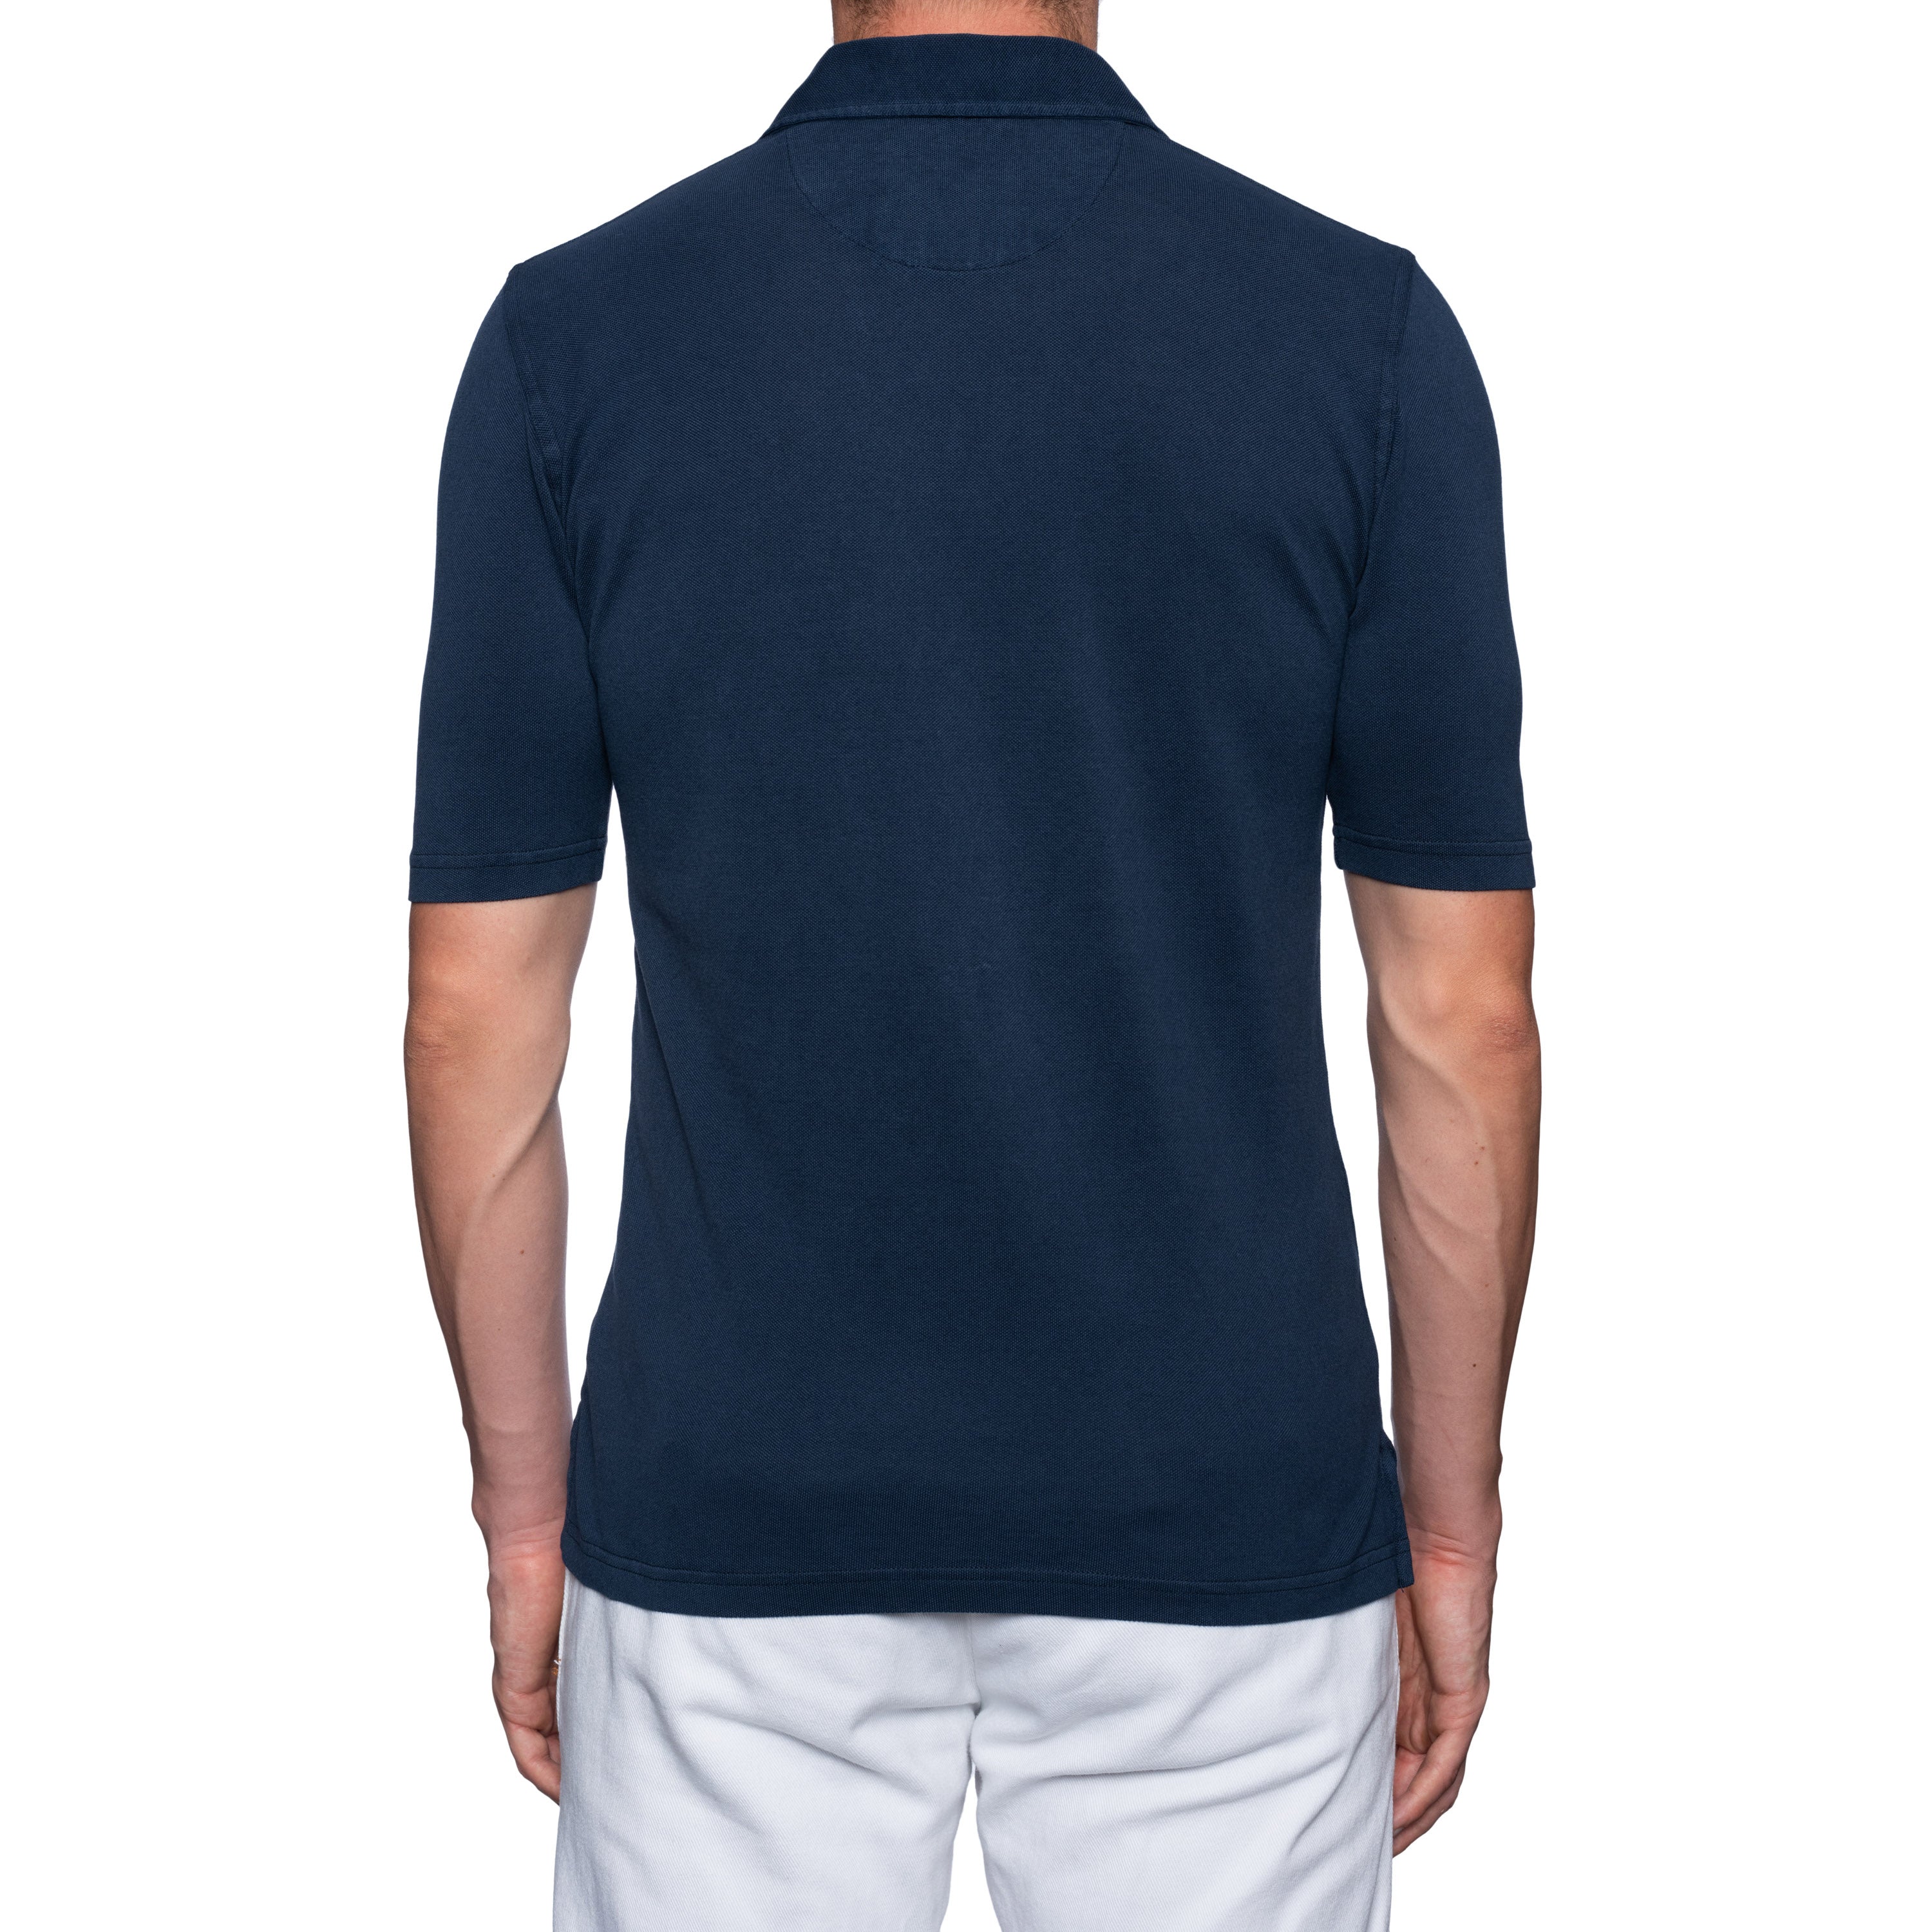 FEDELI 34 LAB Navy Blue Cotton Pique Frosted Short Sleeve Polo Shirt EU 48 NEW US S FEDELI